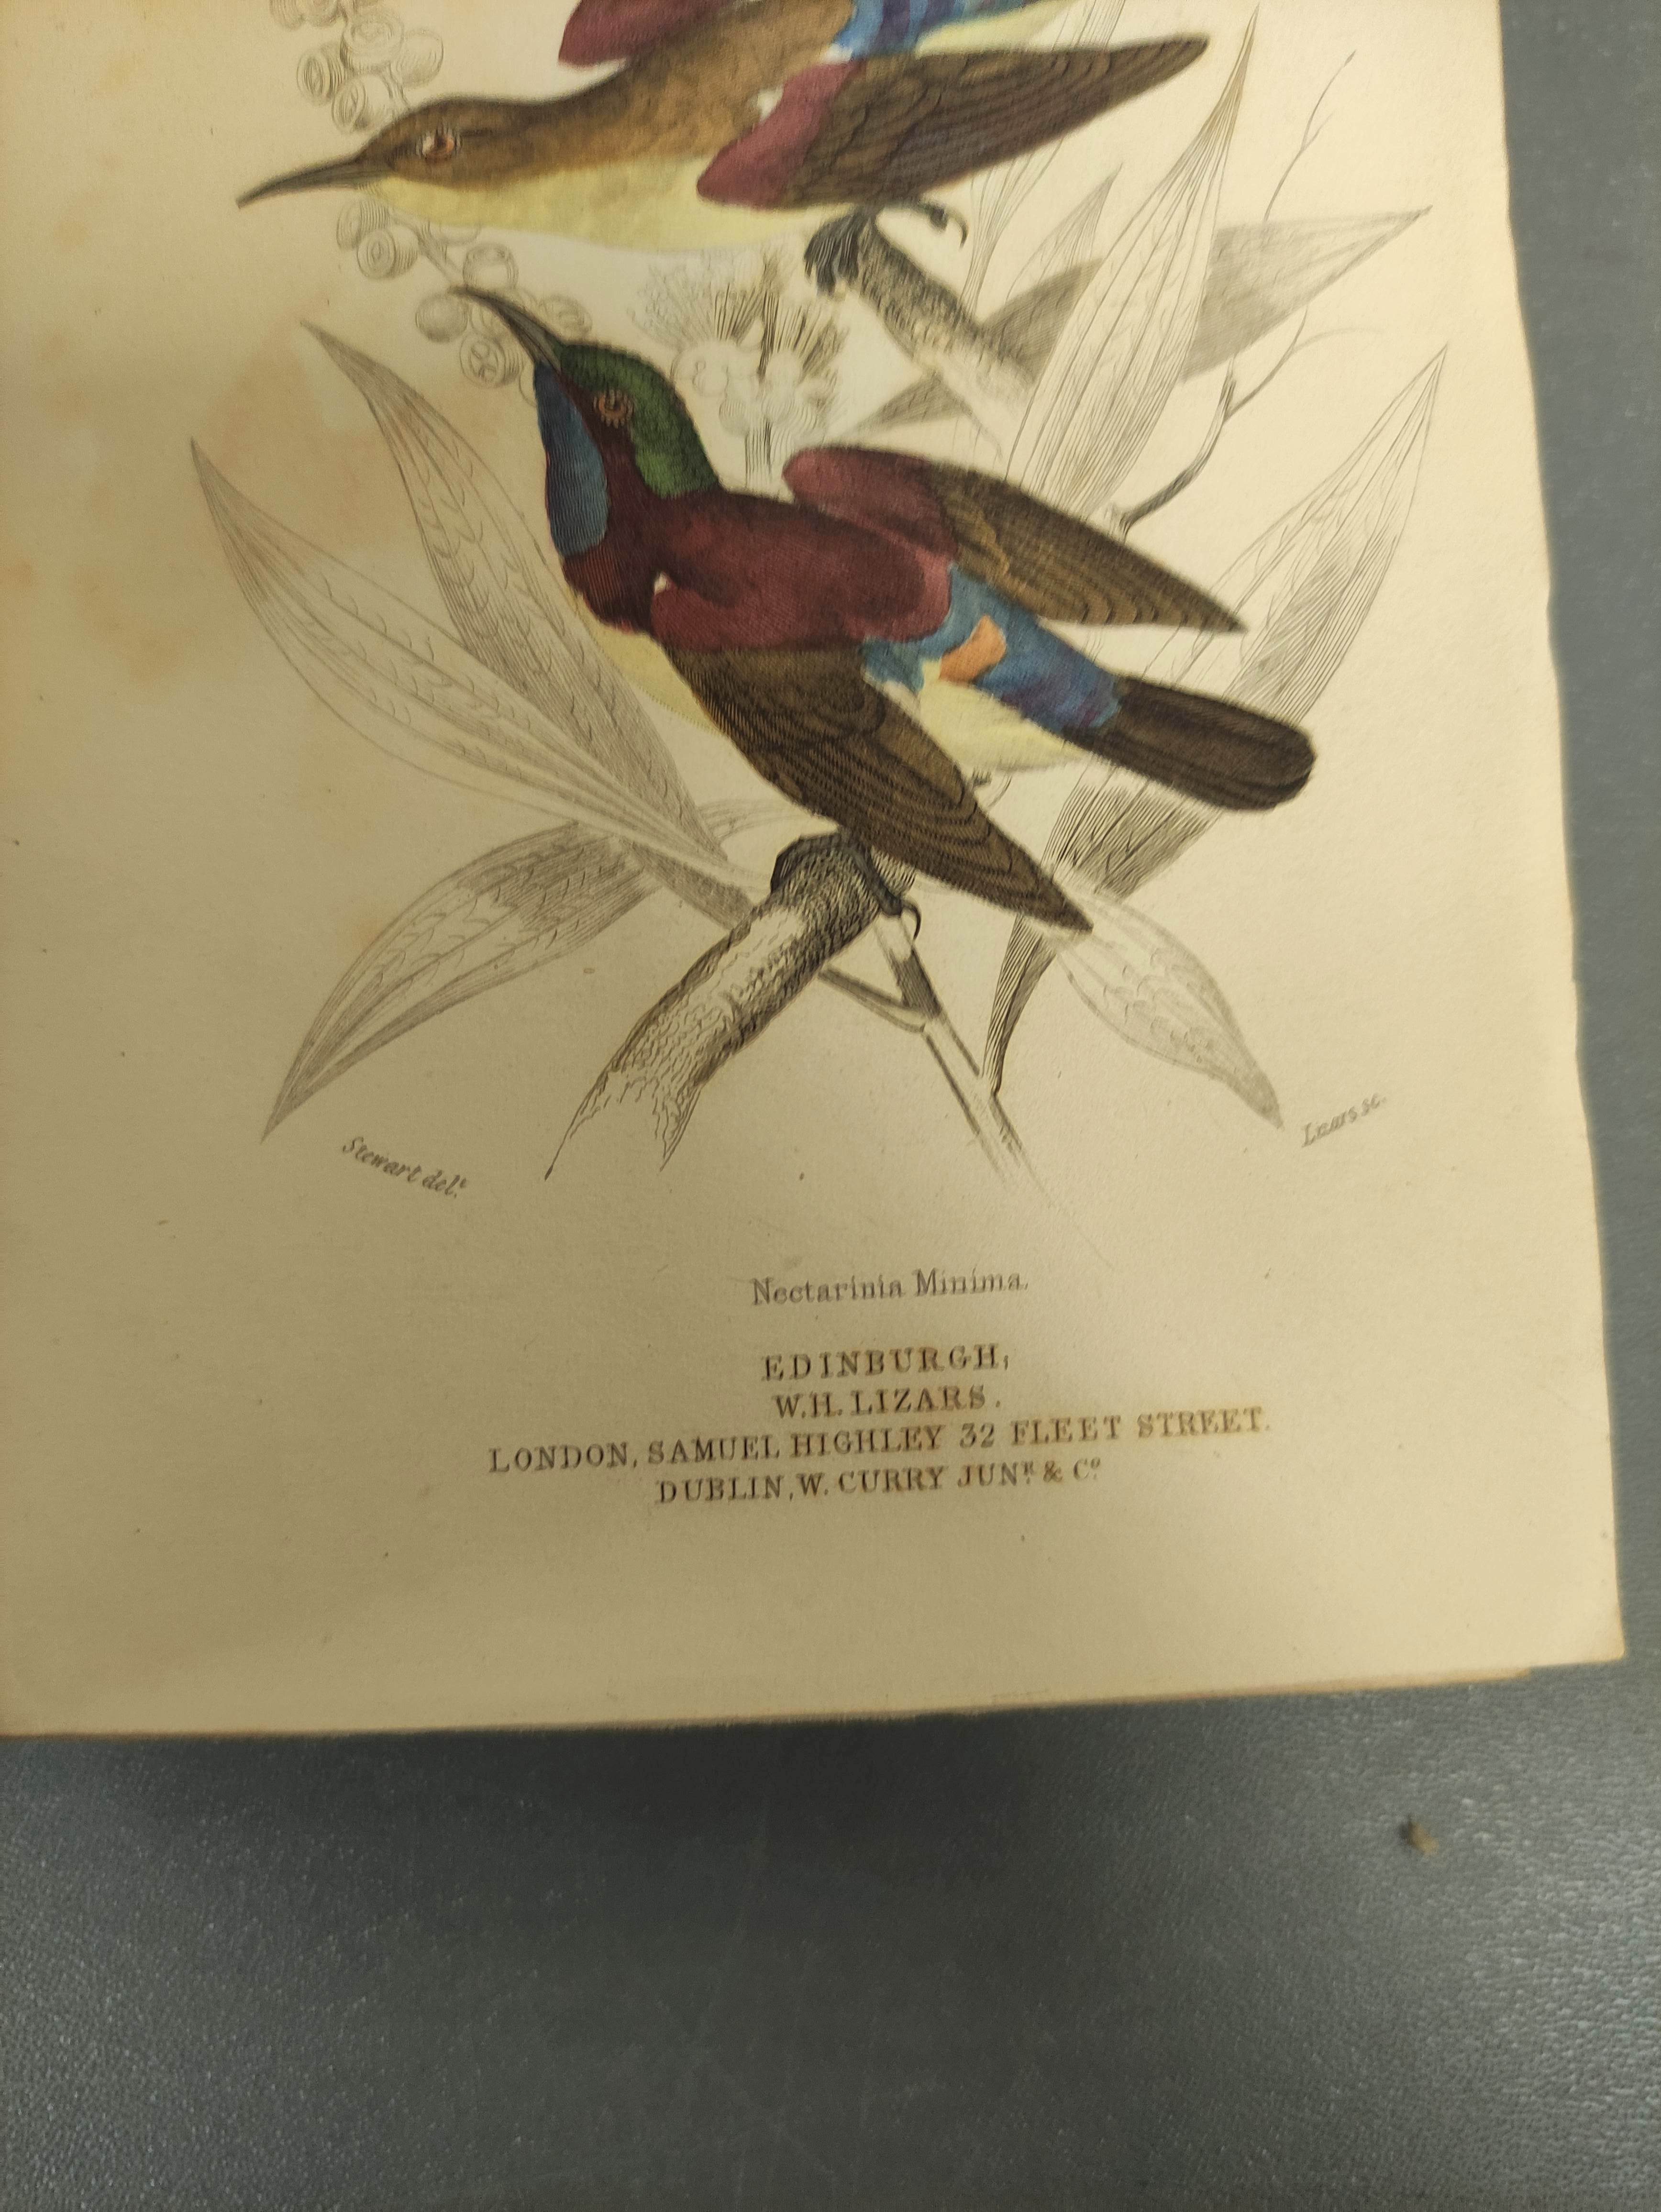 JARDINE SIR WILLIAM.  The Naturalist's Library. Ornithology vols. 1 & 2 re. Humming Birds. Eng. - Image 9 of 16